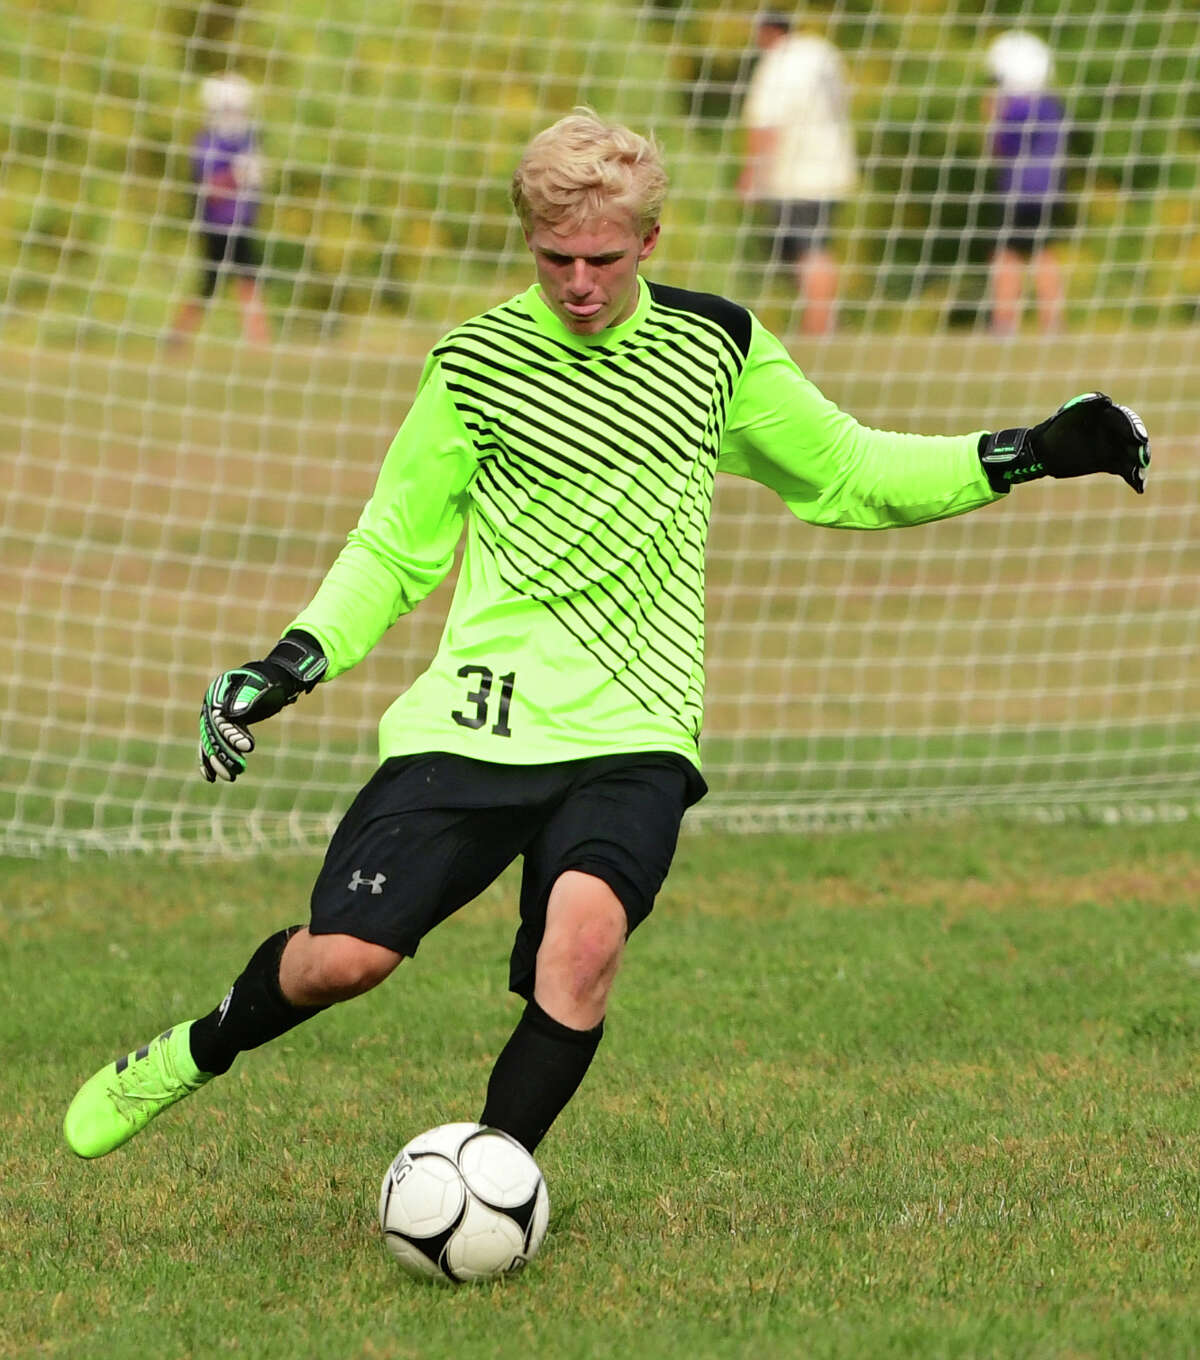 Albany Academy goal keeper Christopher Hanchar kicks the ball during a soccer game against Voorheesville's on Monday, Sept. 23, 2019 in Voorheesville, N.Y. (Lori Van Buren/Times Union)